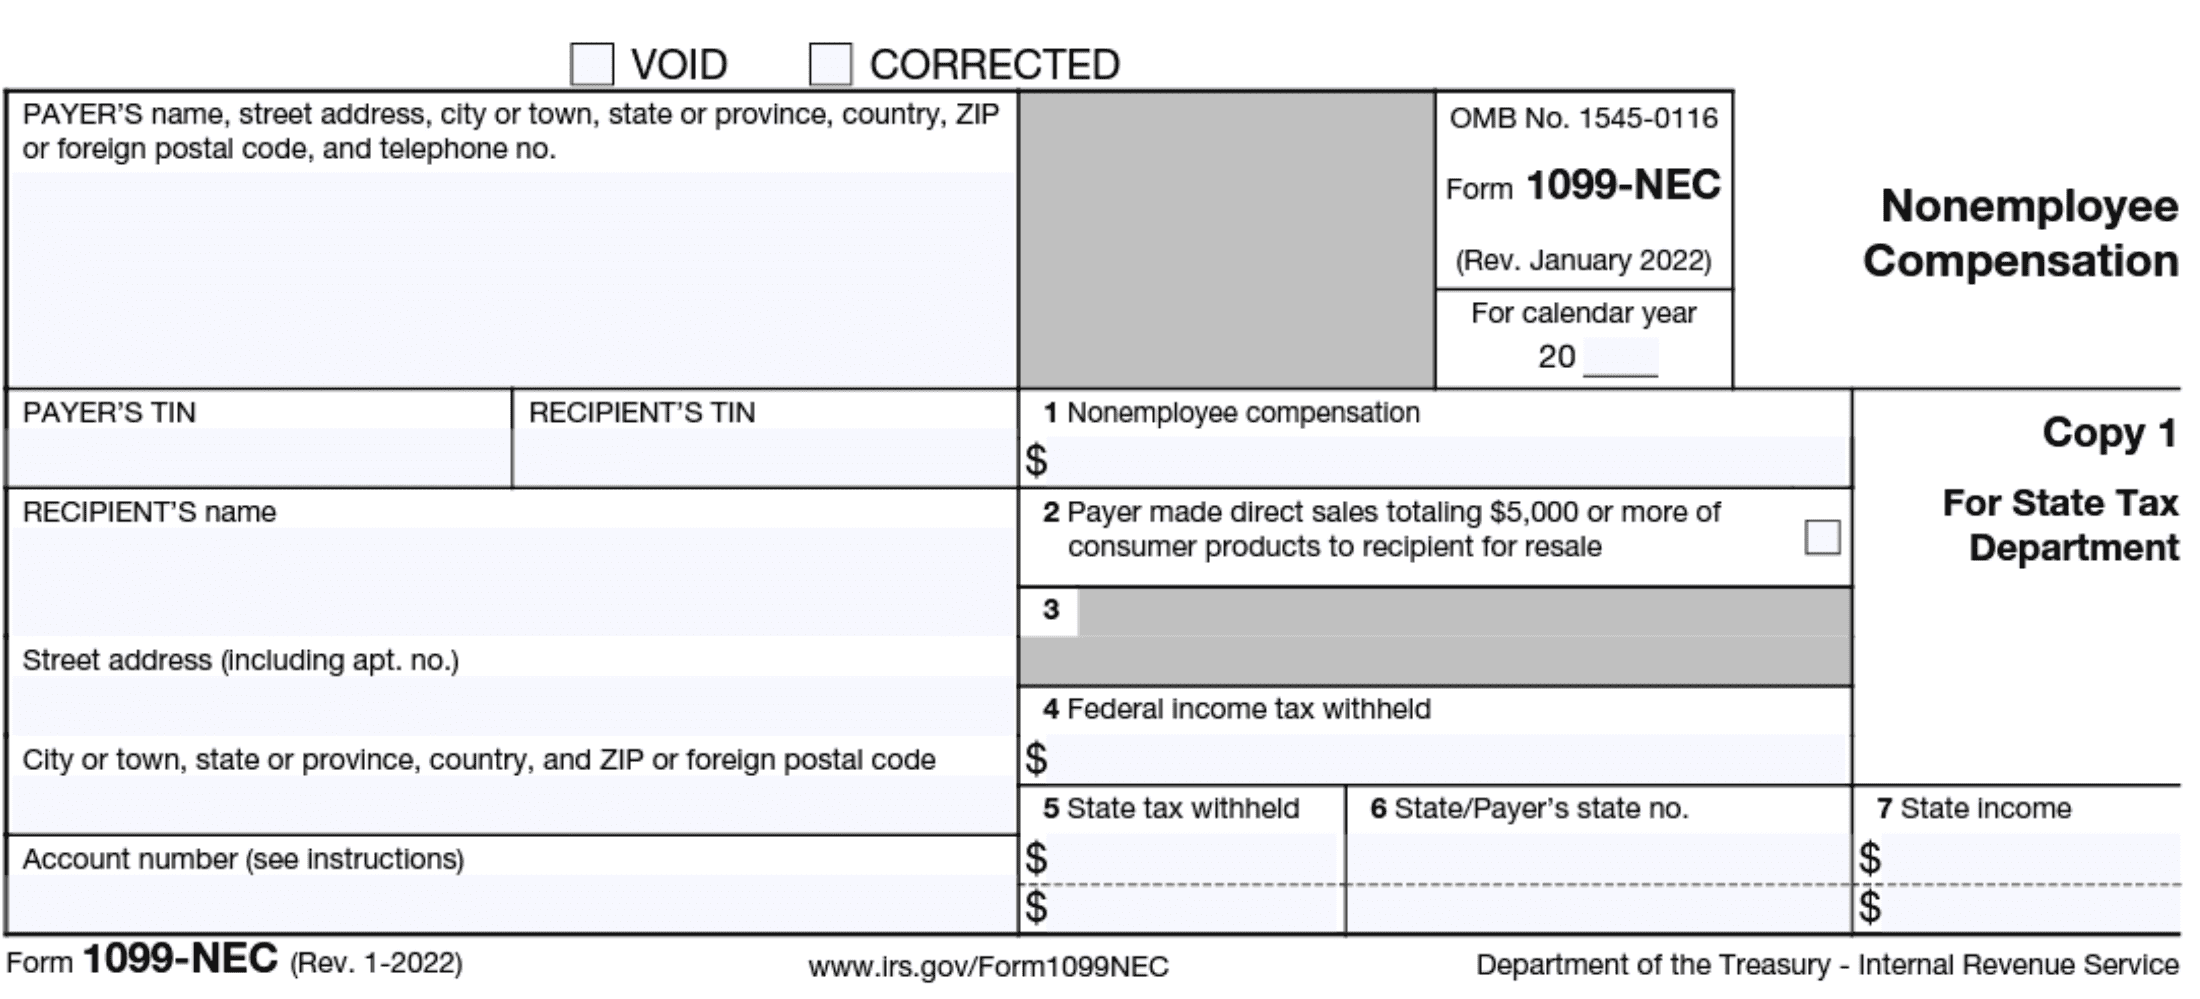 Image of Form 1099-NEC for reporting nonemployee compensation and direct sales. Includes payer and recipient information, taxes withheld, and state tax details.